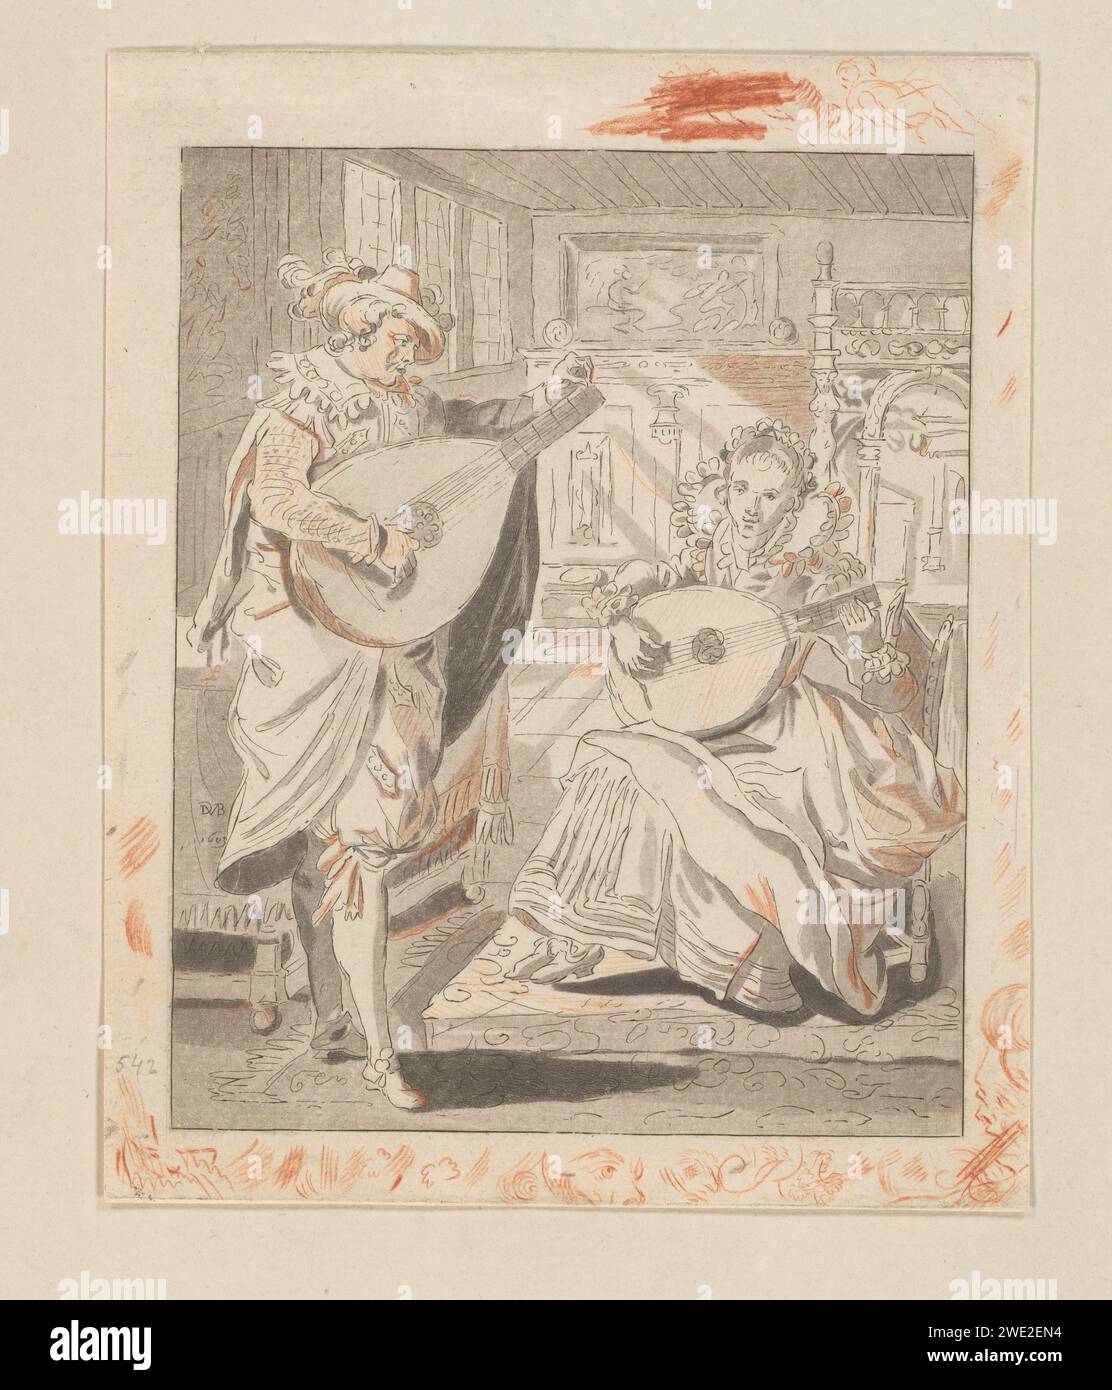 Luiten playing Lord and Dame, Bernhard Schreuder, After Karel van Mander (I), After David Vinckboons, 1772 - 1774 print Interior with a man and a woman who both play the lute. The print is loose in an album, see page 22. Amsterdam paper. chalk etching / drawing interior of the house. lute, and special forms of lute, e.g.: theorbo Stock Photo